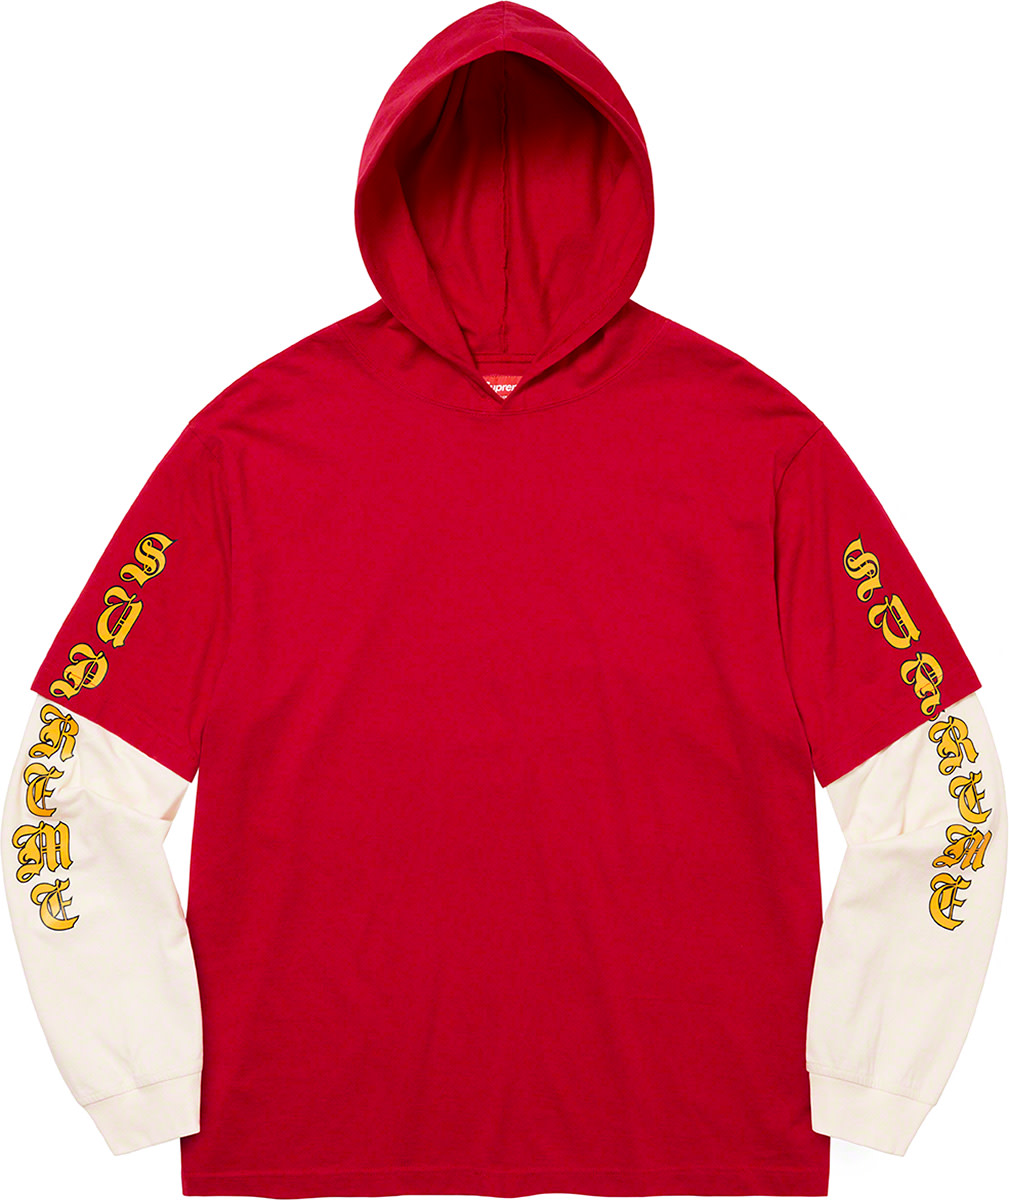 Supreme Layered Hooded LS Top | Supreme - SLN Official